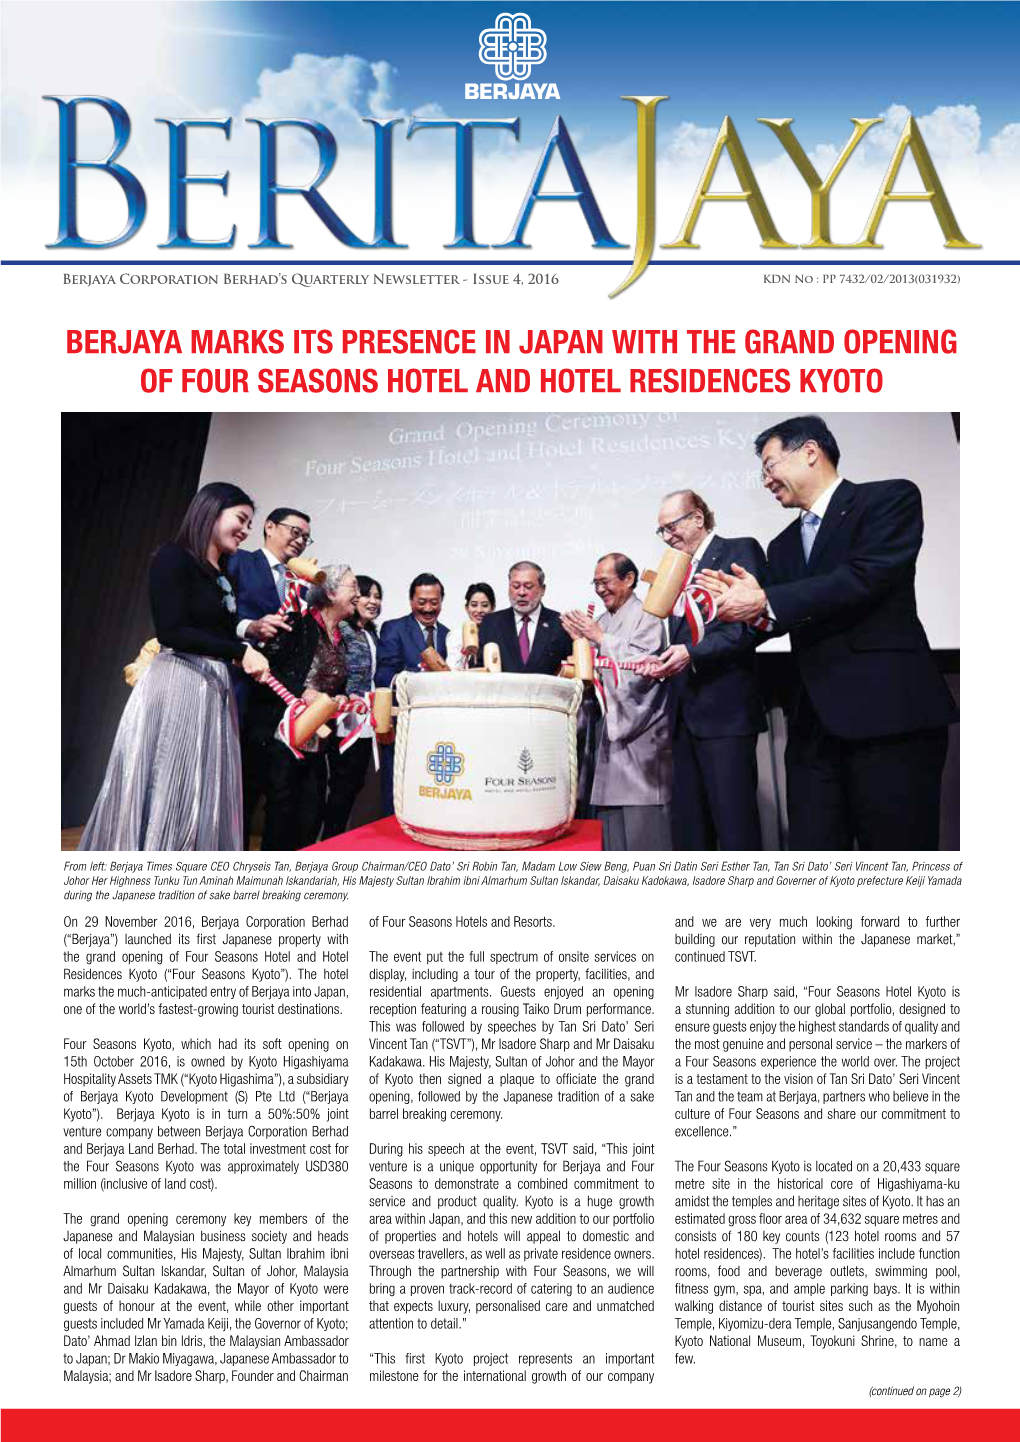 Berjaya Marks Its Presence in Japan with the Grand Opening of Four Seasons Hotel and Hotel Residences Kyoto